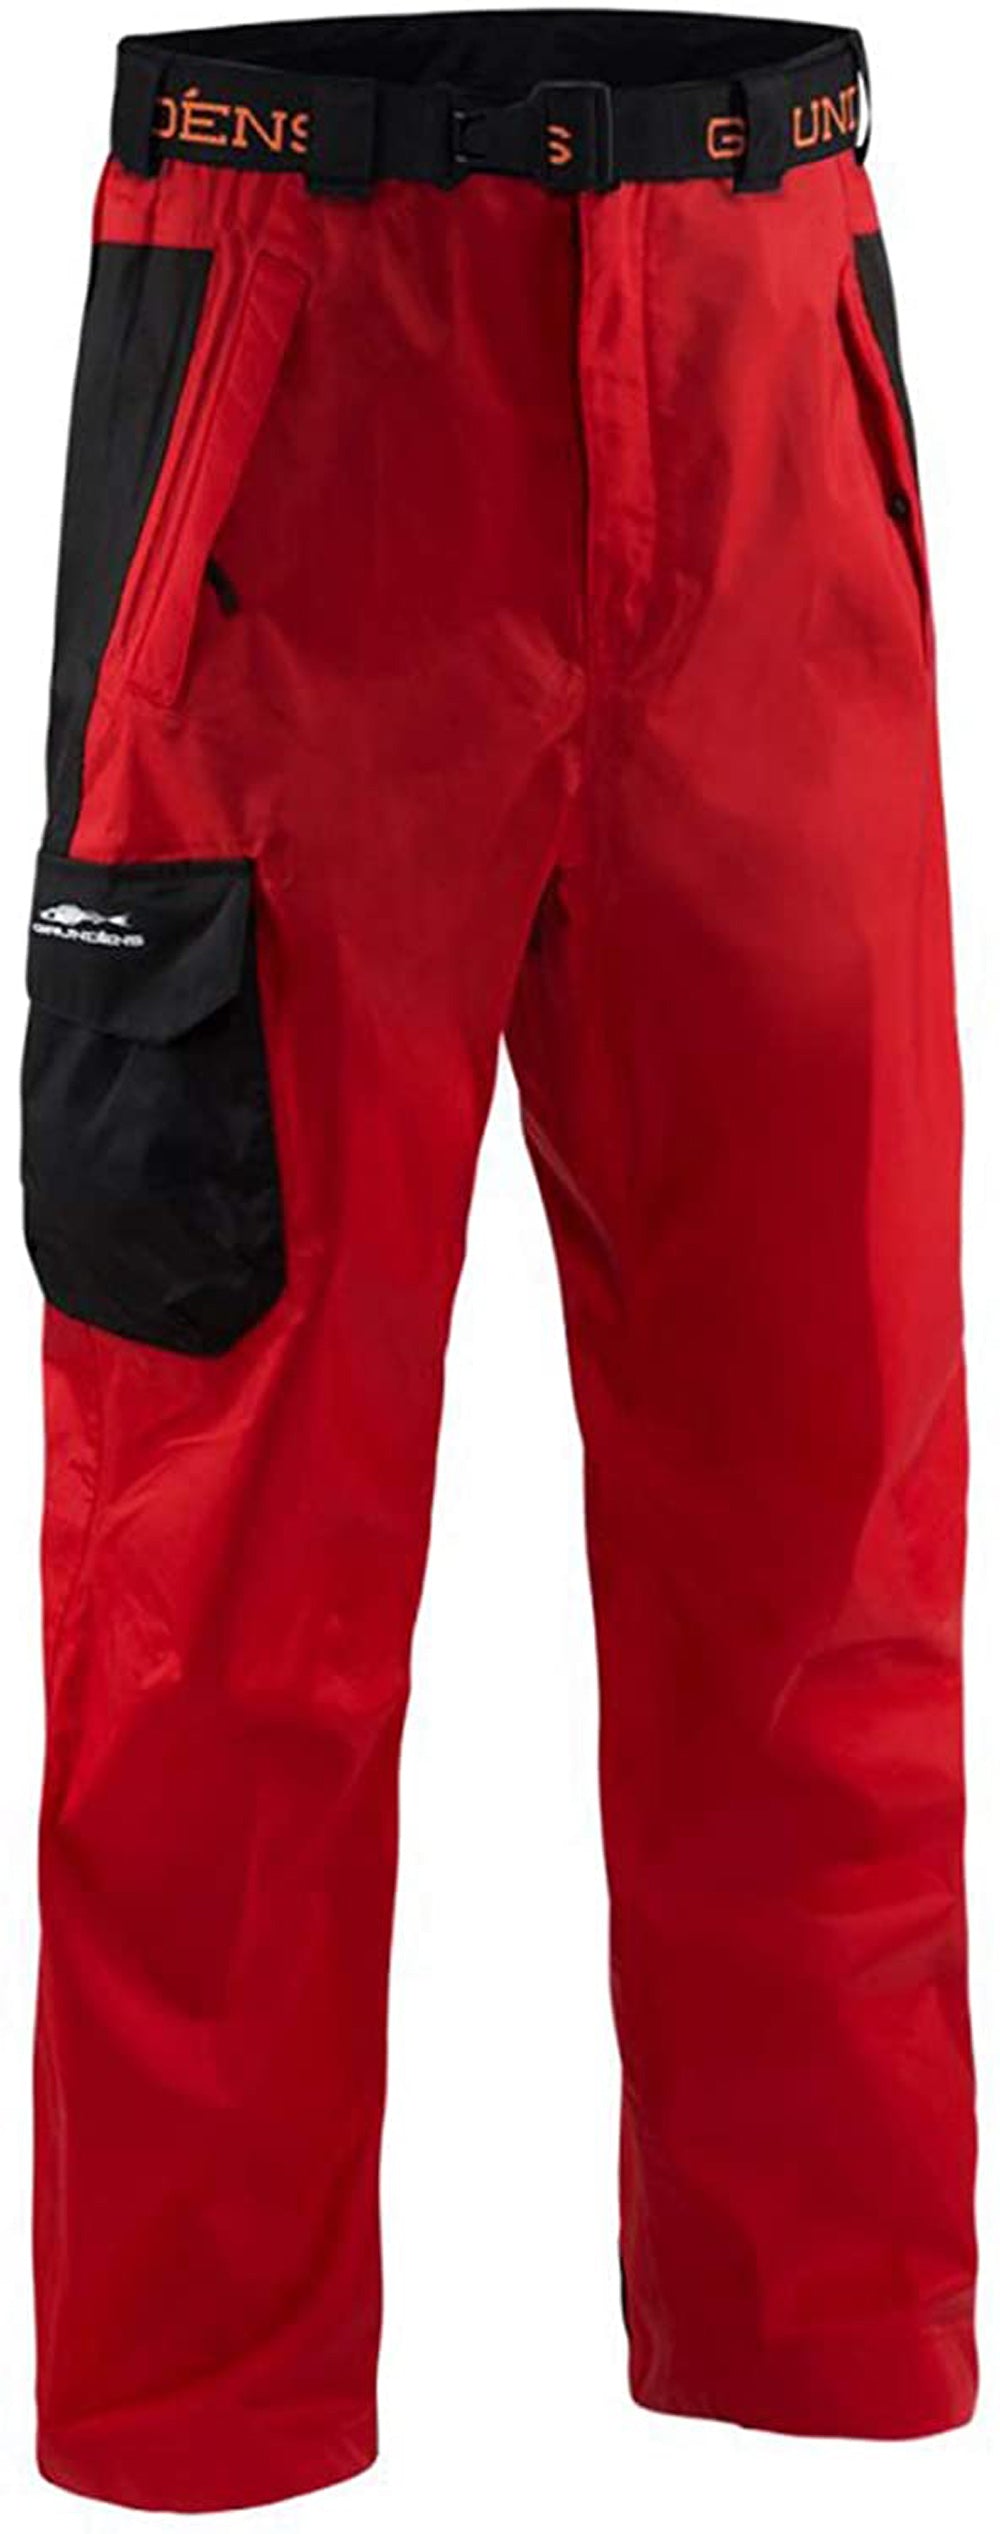 Weather Watch Pant in Red color from the front view